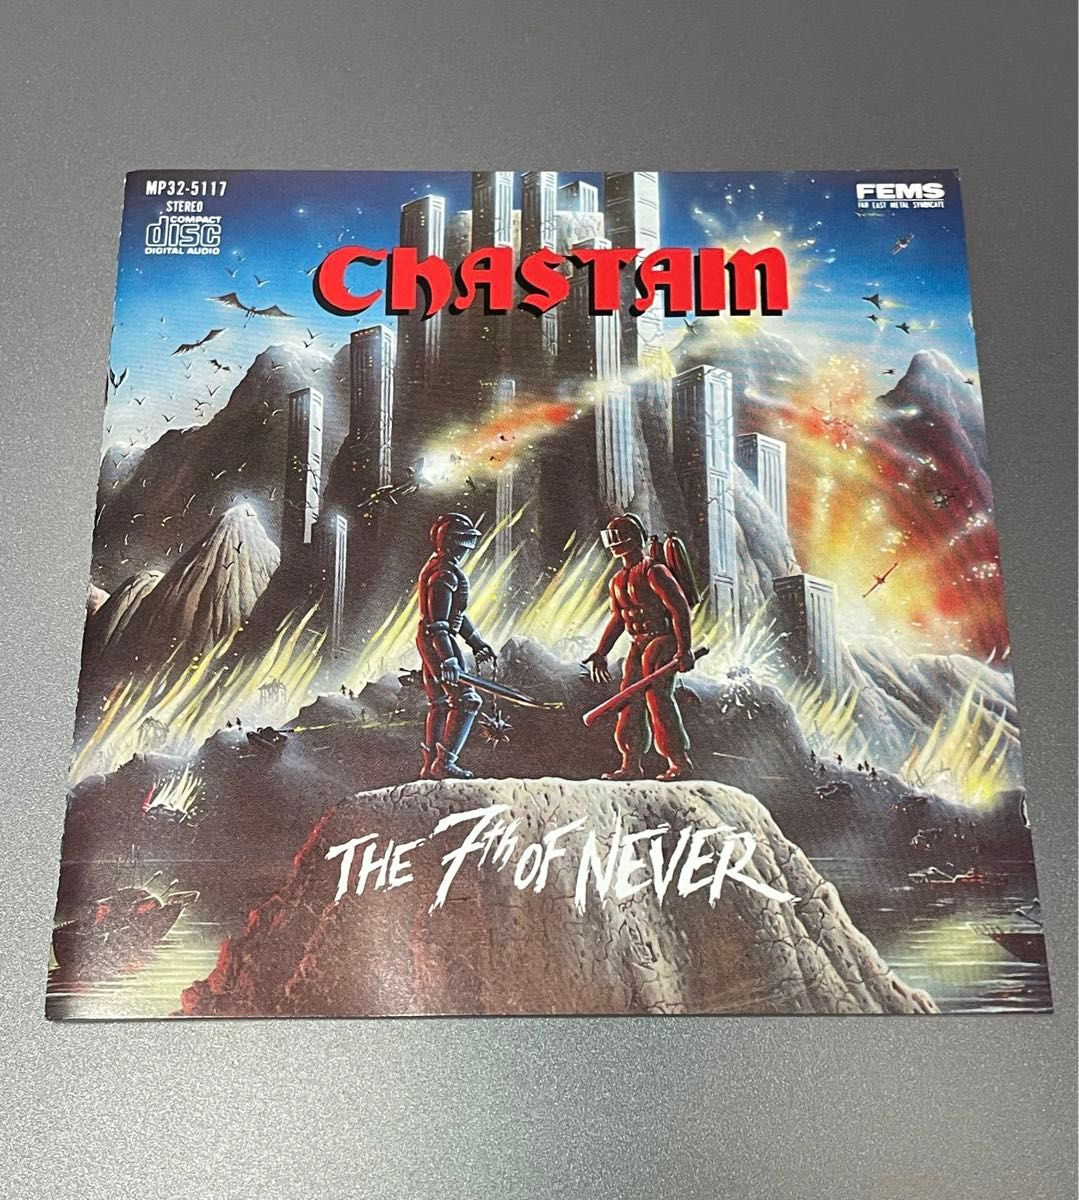 Chastain / The 7th Of Never チャステイン 日本盤帯付